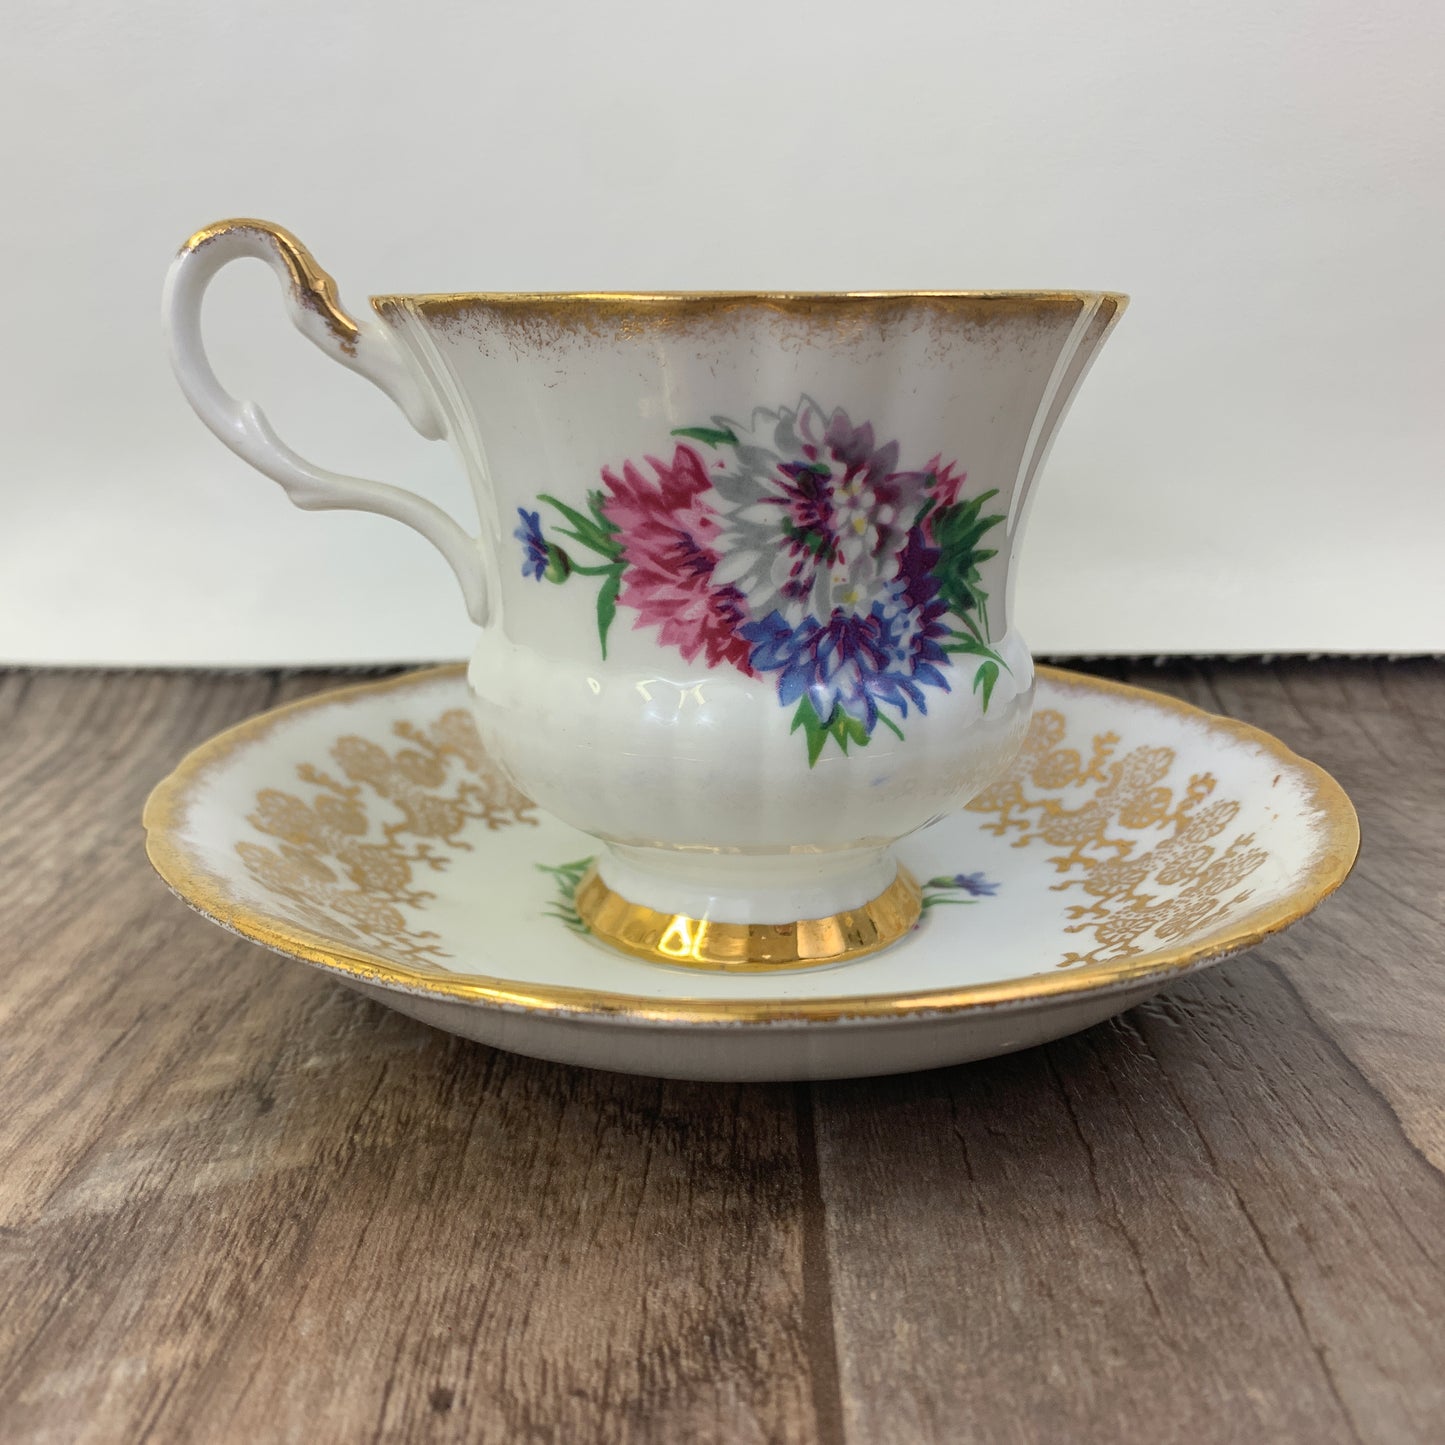 Windsor Bone China Teacup and Saucer with Gold Design, Pink, Blue, and White Floral Pattern